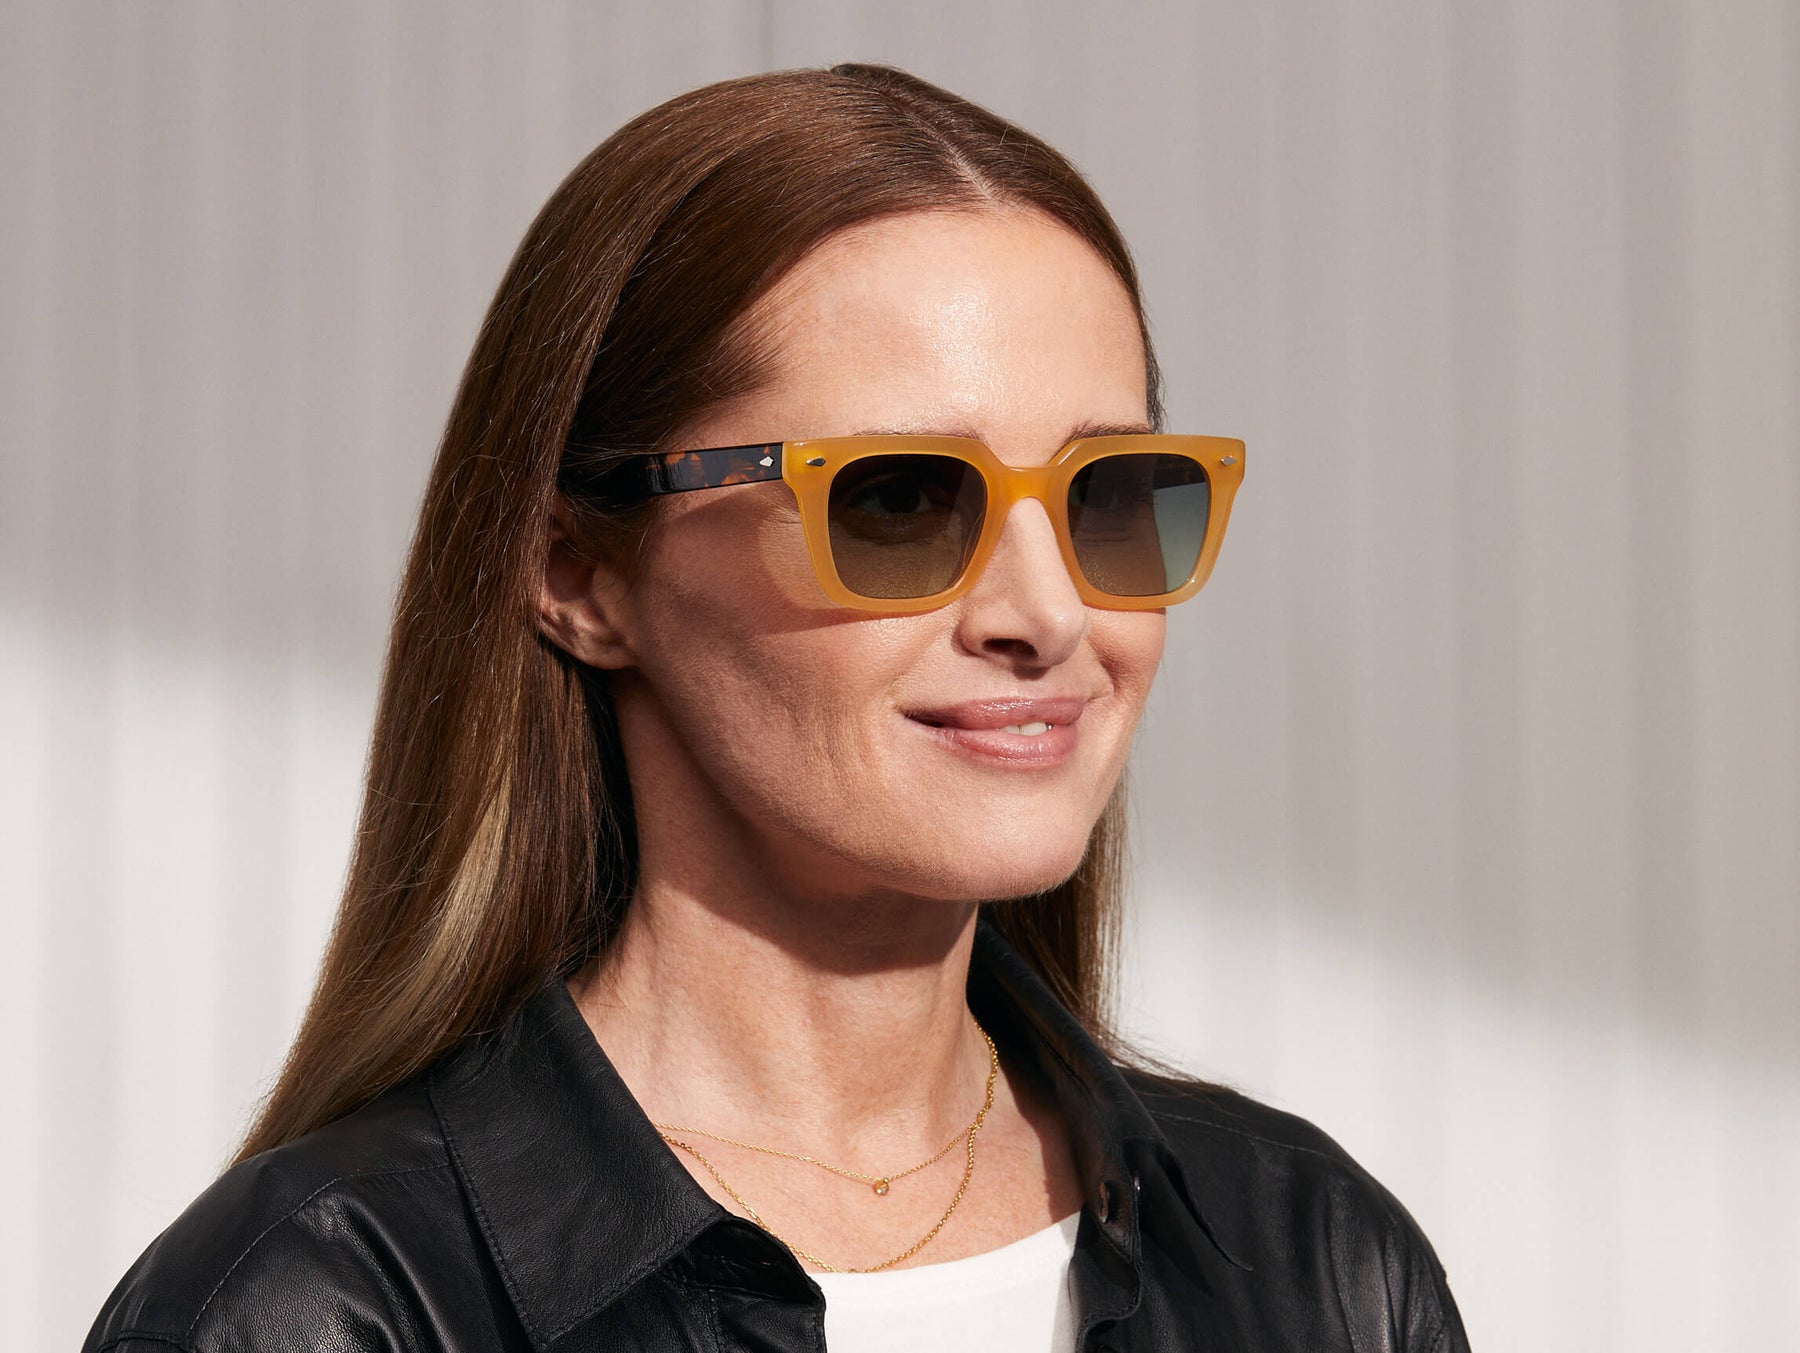 Model is wearing The GROBER SUN in Honey/Tortoise in size 48 with Forest Wood Tinted Lenses